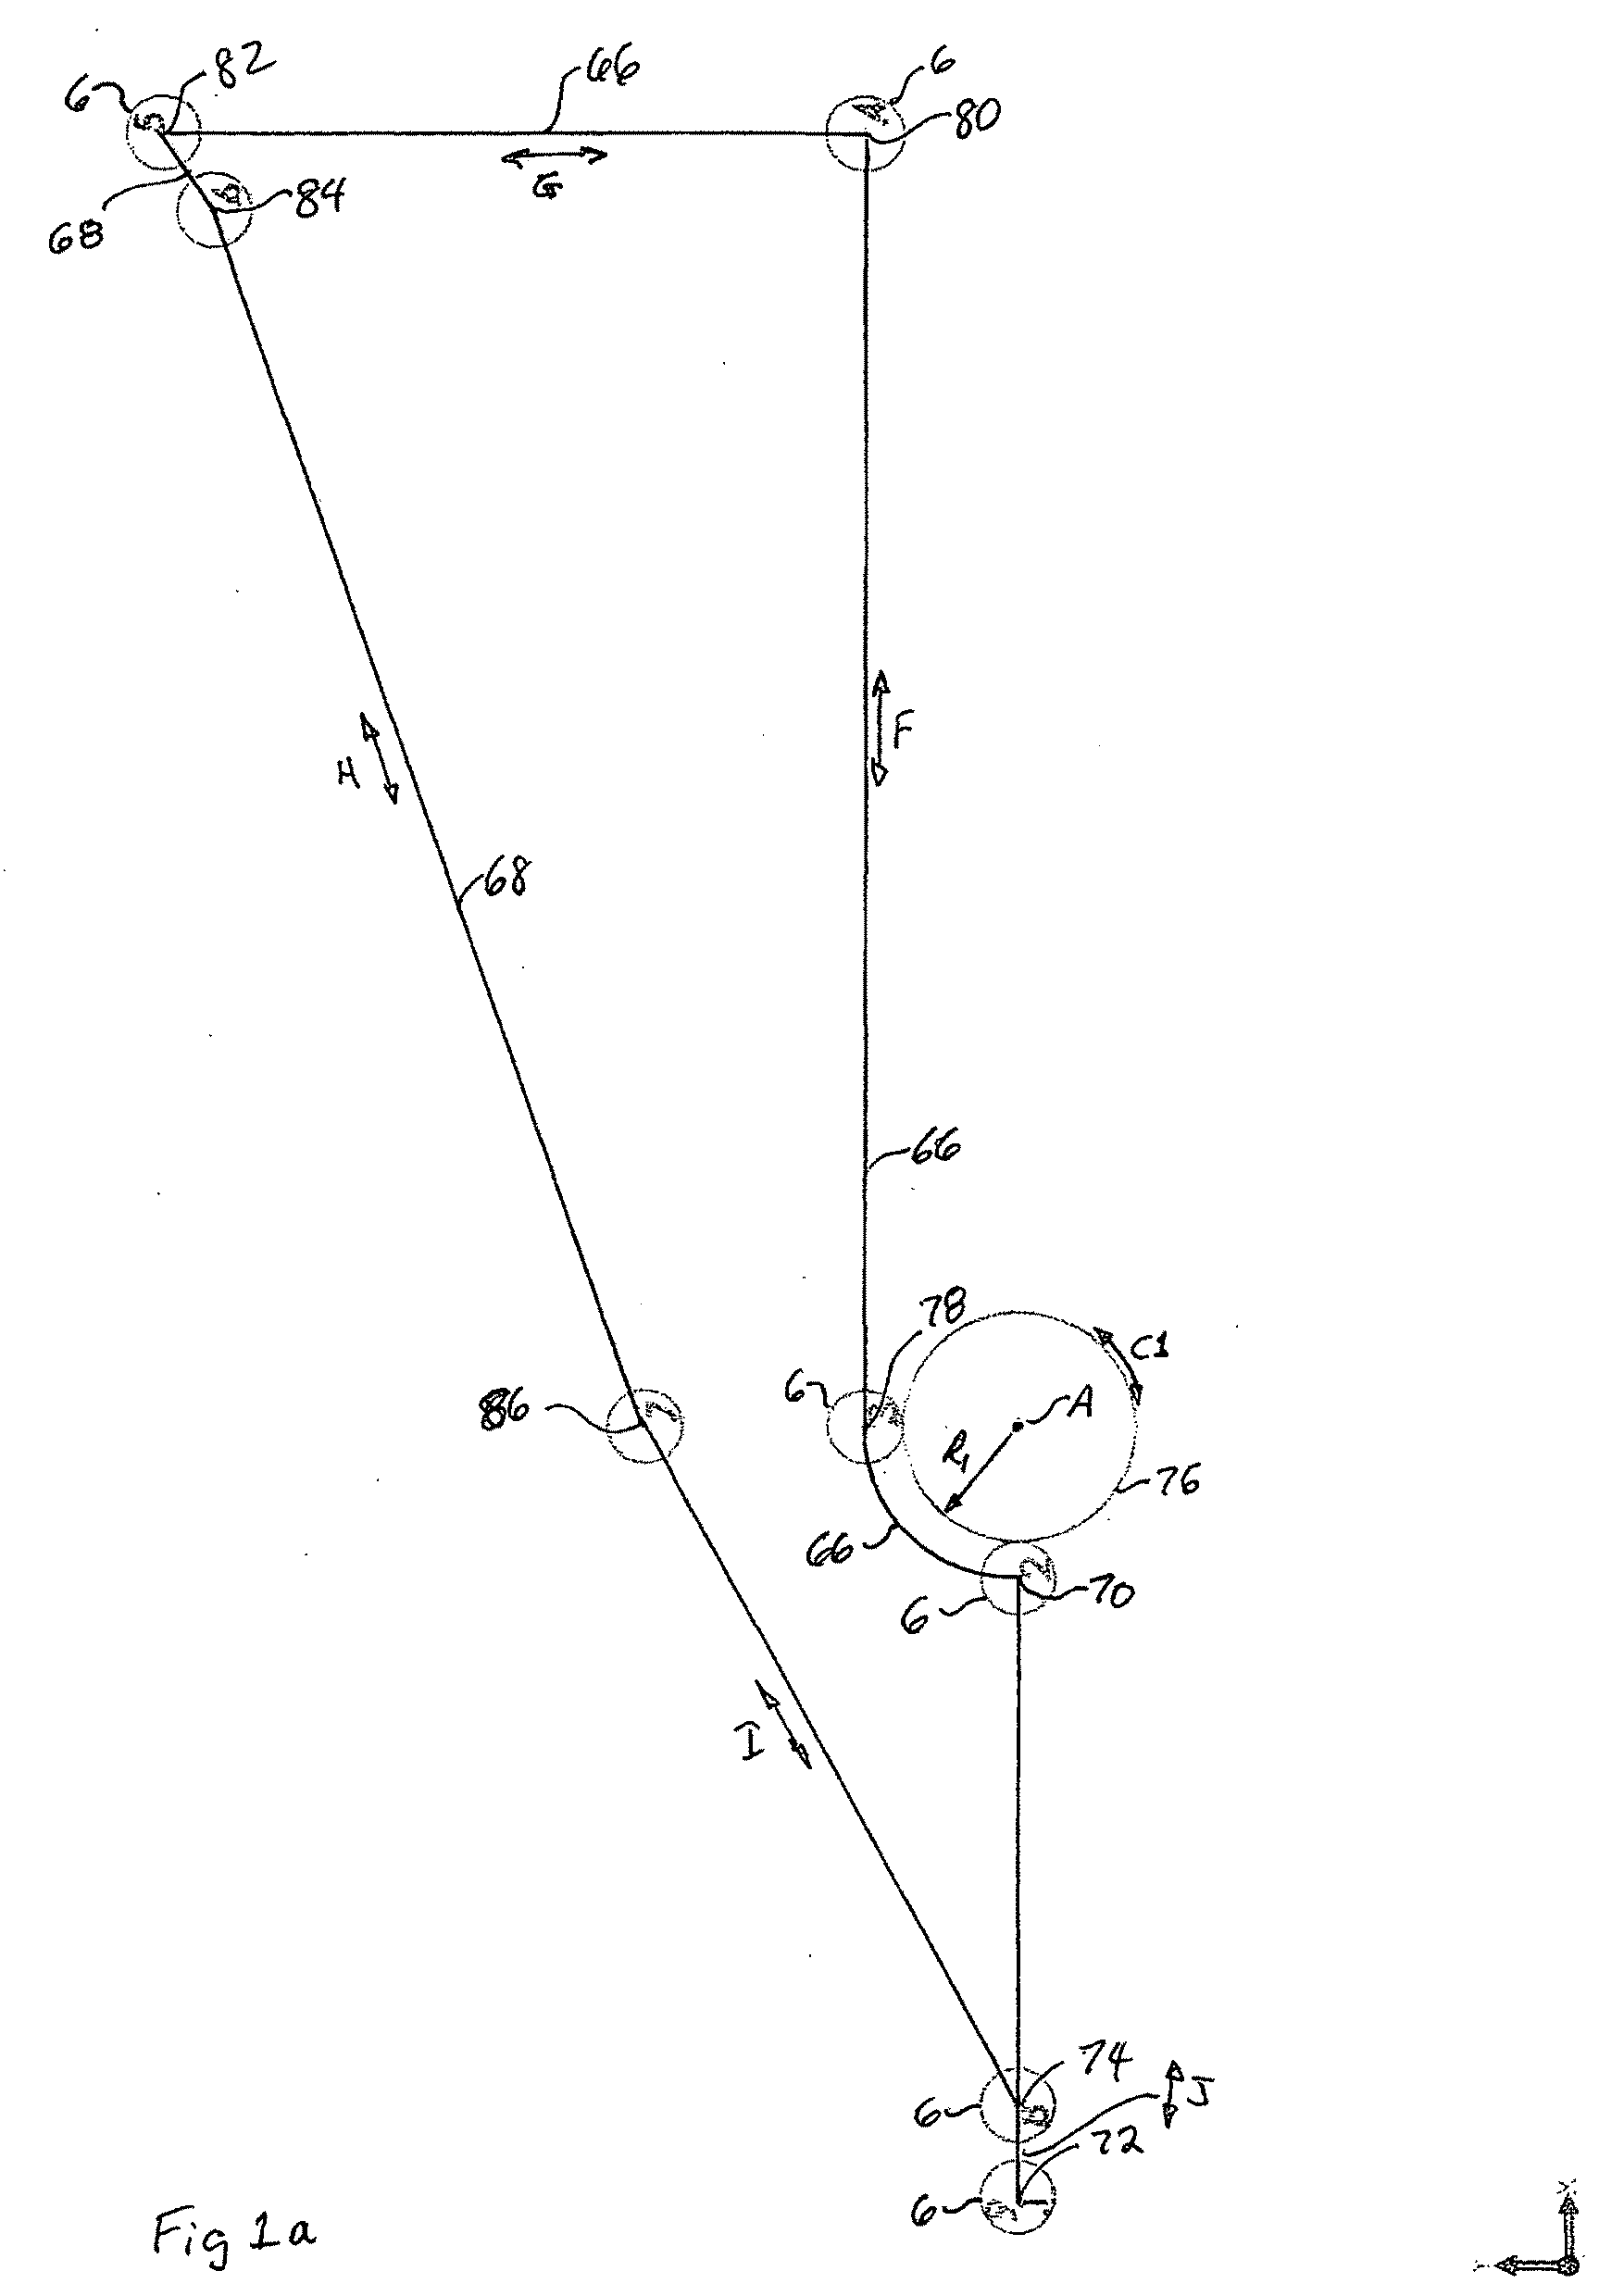 Apparatus for handling and racking pipes